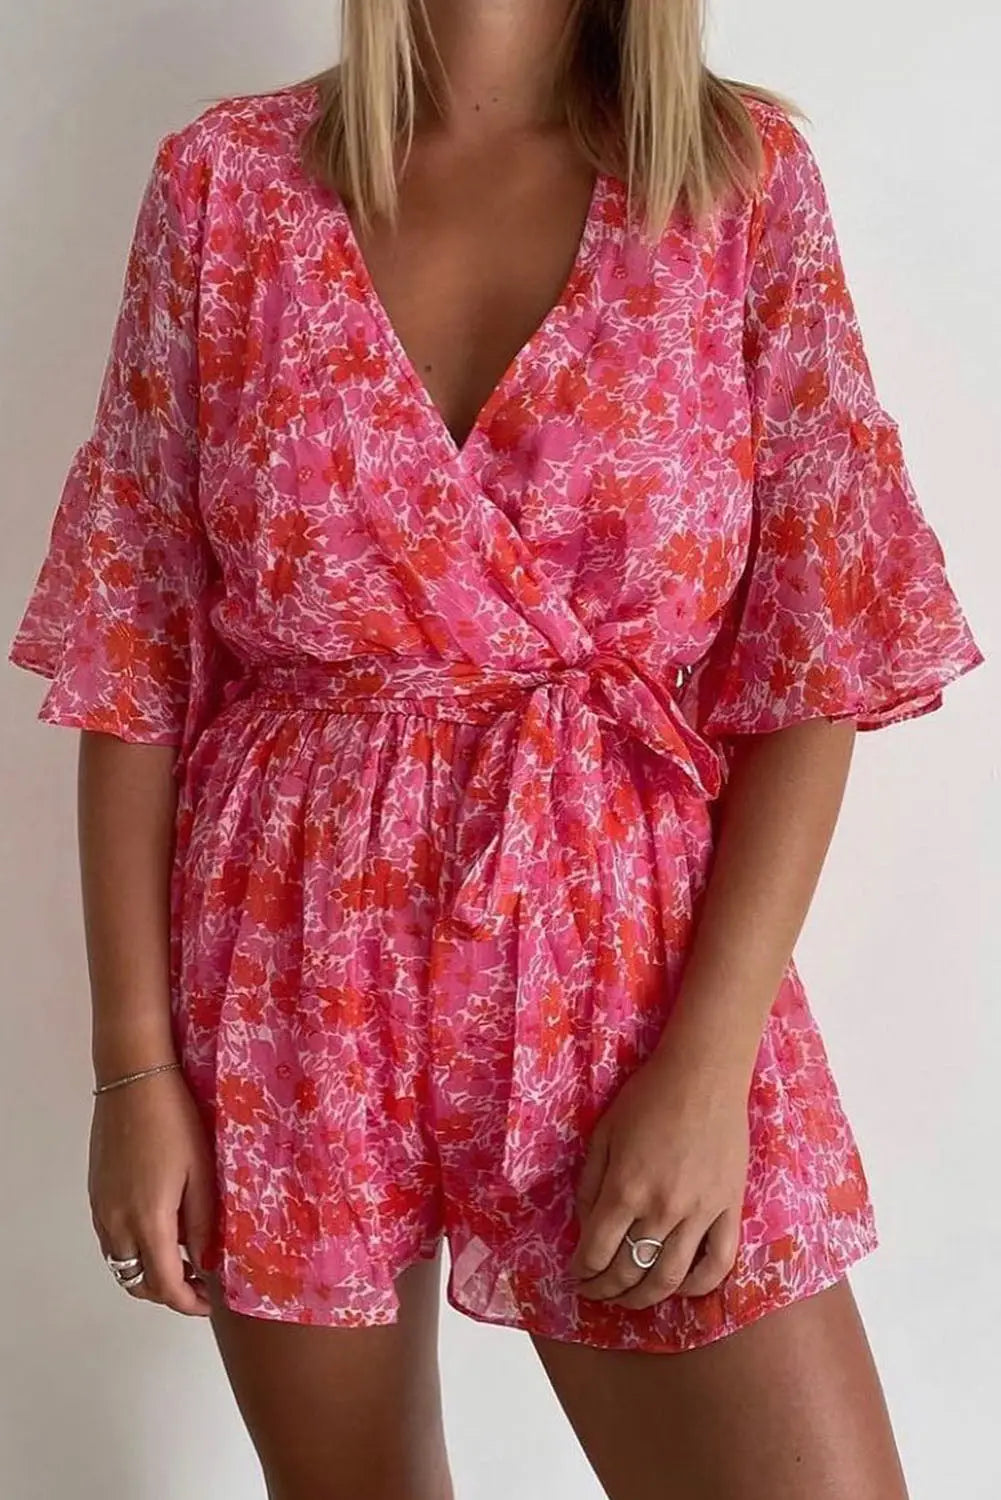 Pink v neck ruffled sleeve floral romper - s / 100% polyester - jumpsuits & rompers